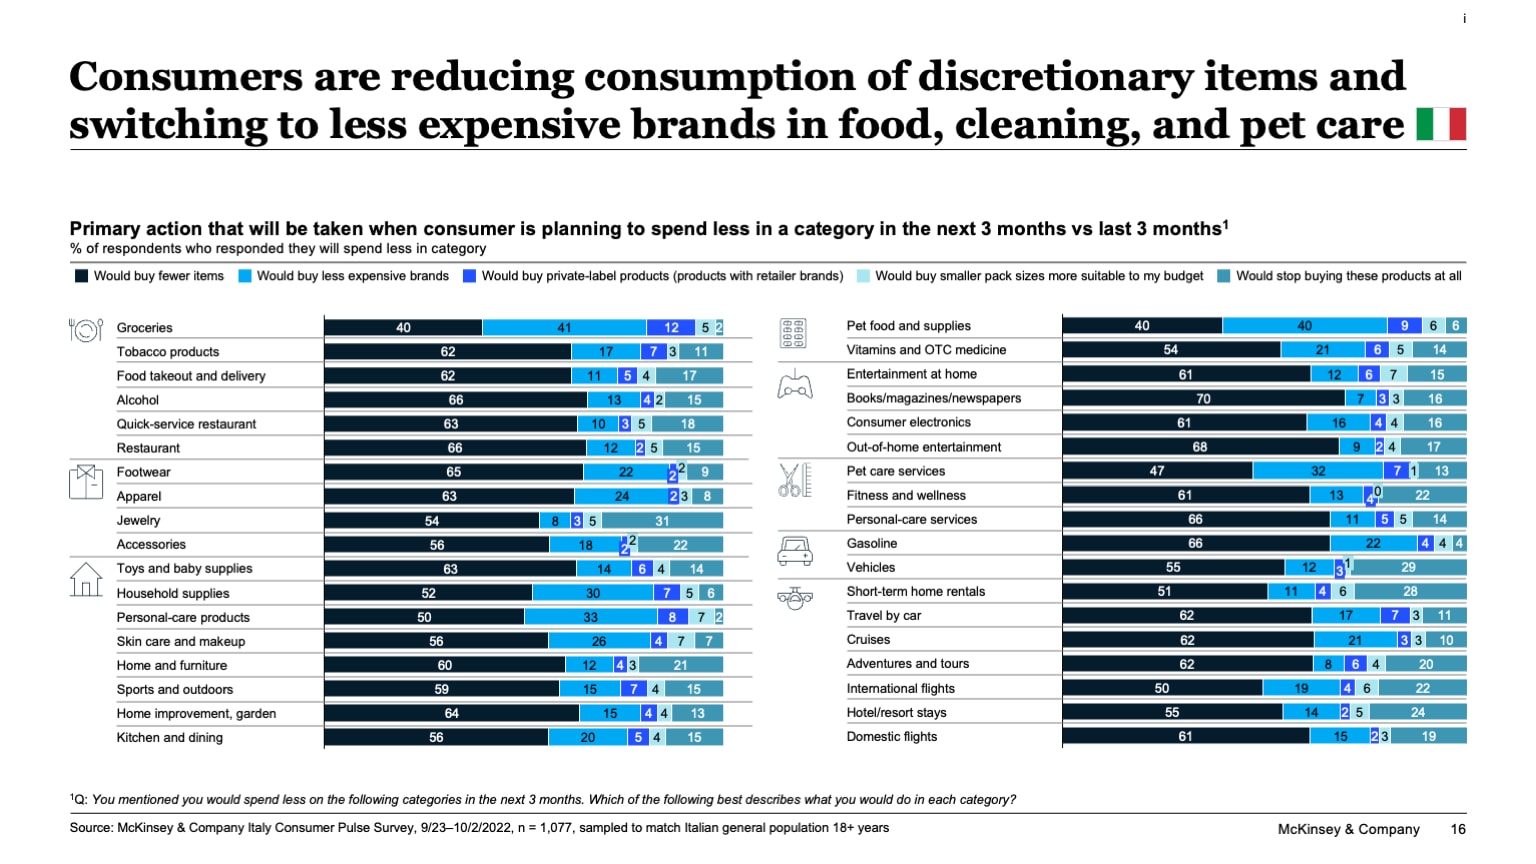 Consumers are reducing consumption of discretionary items and switching to less expensive brands in food, cleaning, and pet care